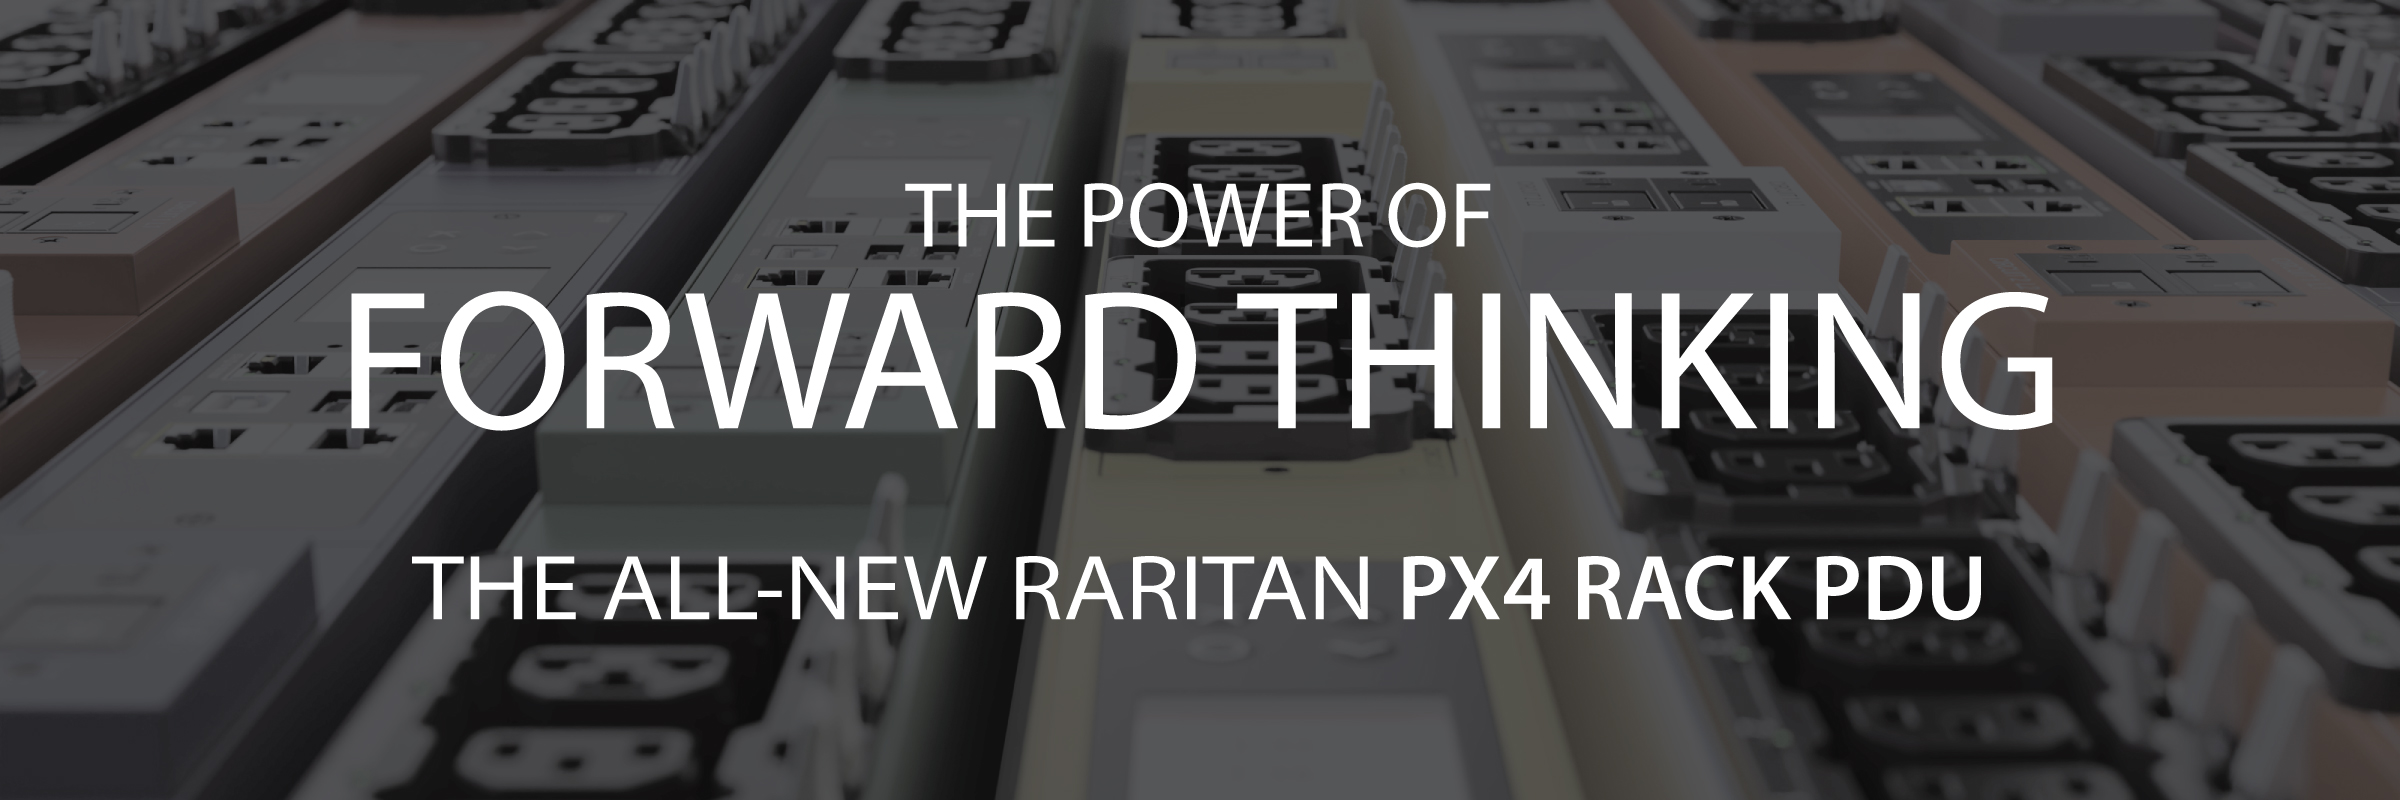 <h2>The need for reliable power, monitoring, and intelligence has never been greater.</h2>
<p>The all-new Raritan PX4 Rack PDU doesn’t just solve today’s power needs; it anticipates tomorrow’s power challenges. The PX4 combines 30+ years of battle-tested intelligence with industry-proven outlet technology for unparalleled visibility, flexibility, and security. Experience why the most successful data centers trust Raritan PDUs to power their critical infrastructure.<br>
</p>
<h2>OUTPACE. OUTTHINK. OUTPERFORM.</h2>
<ul>
  <li>Industry-leading Intelligence</li>
  <li>Exceptional Flexibility and Density</li>
  <li>Enterprise-Level Security</li>
  <li>Extraordinary Reliability</li></ul>